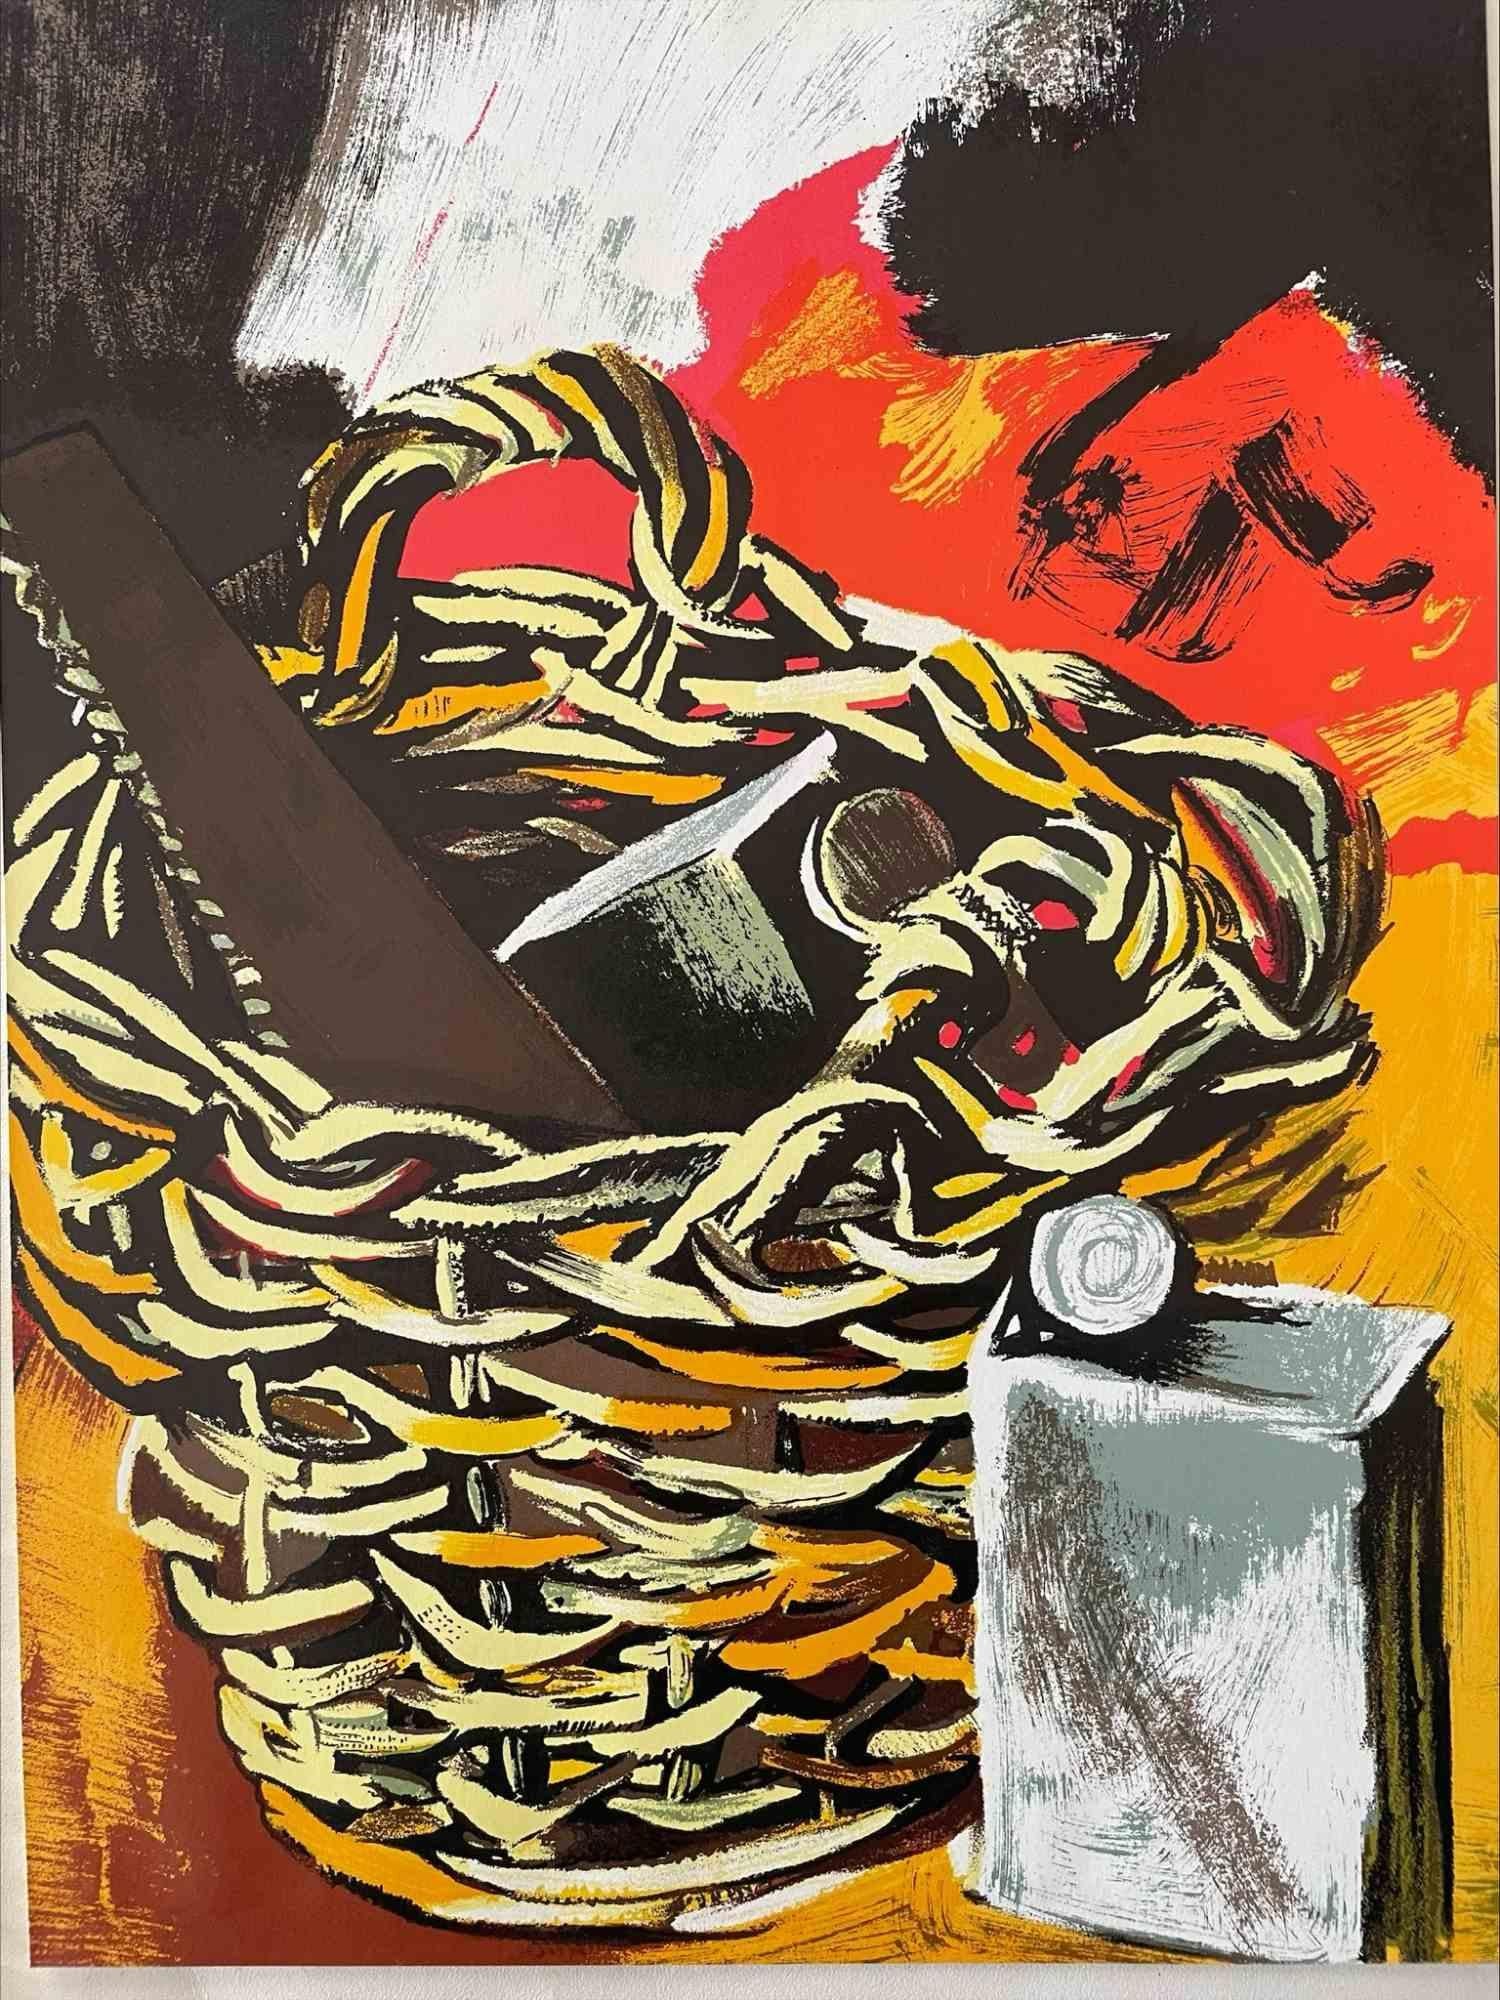 Hommage à Guttuso - Basket and Saw - Lithograph by Renato Guttuso - 1981